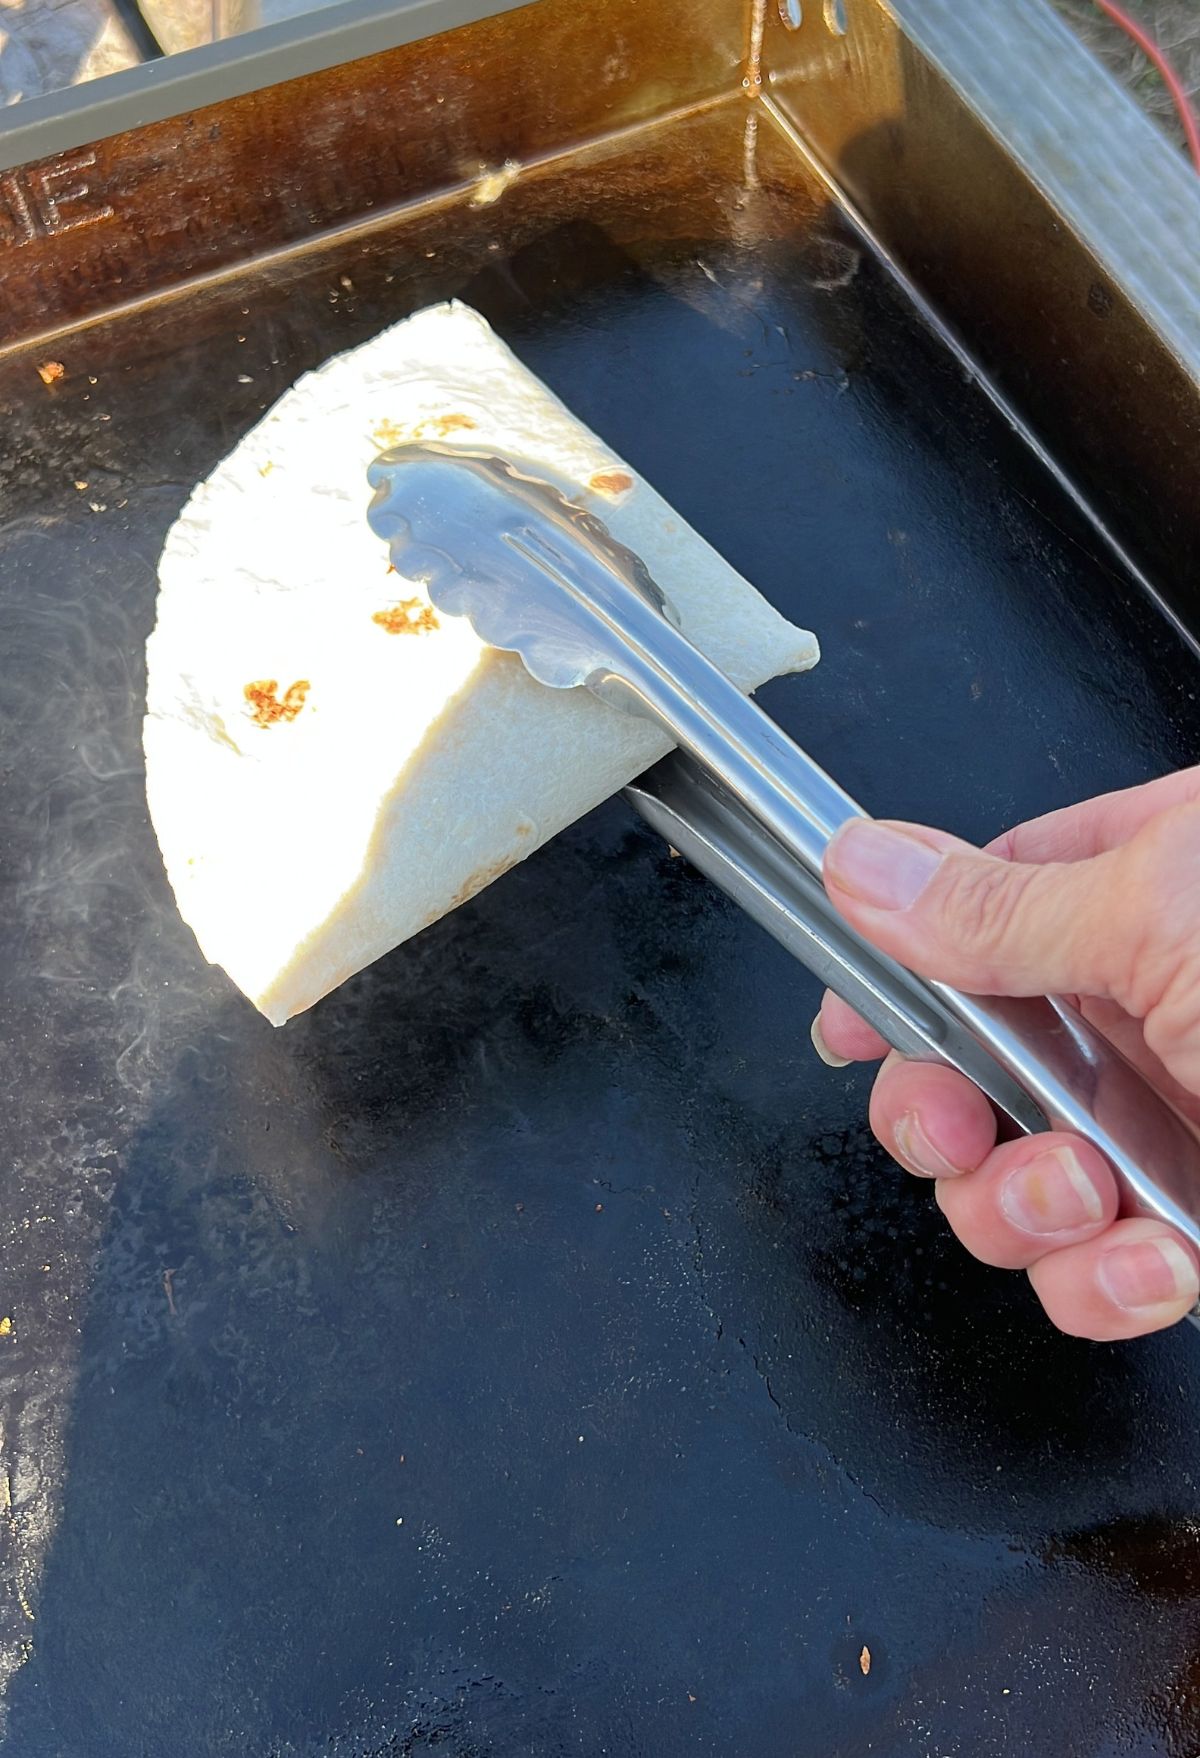 Grilling a tortilla on an outdoor flat-top grill using metal tongs.